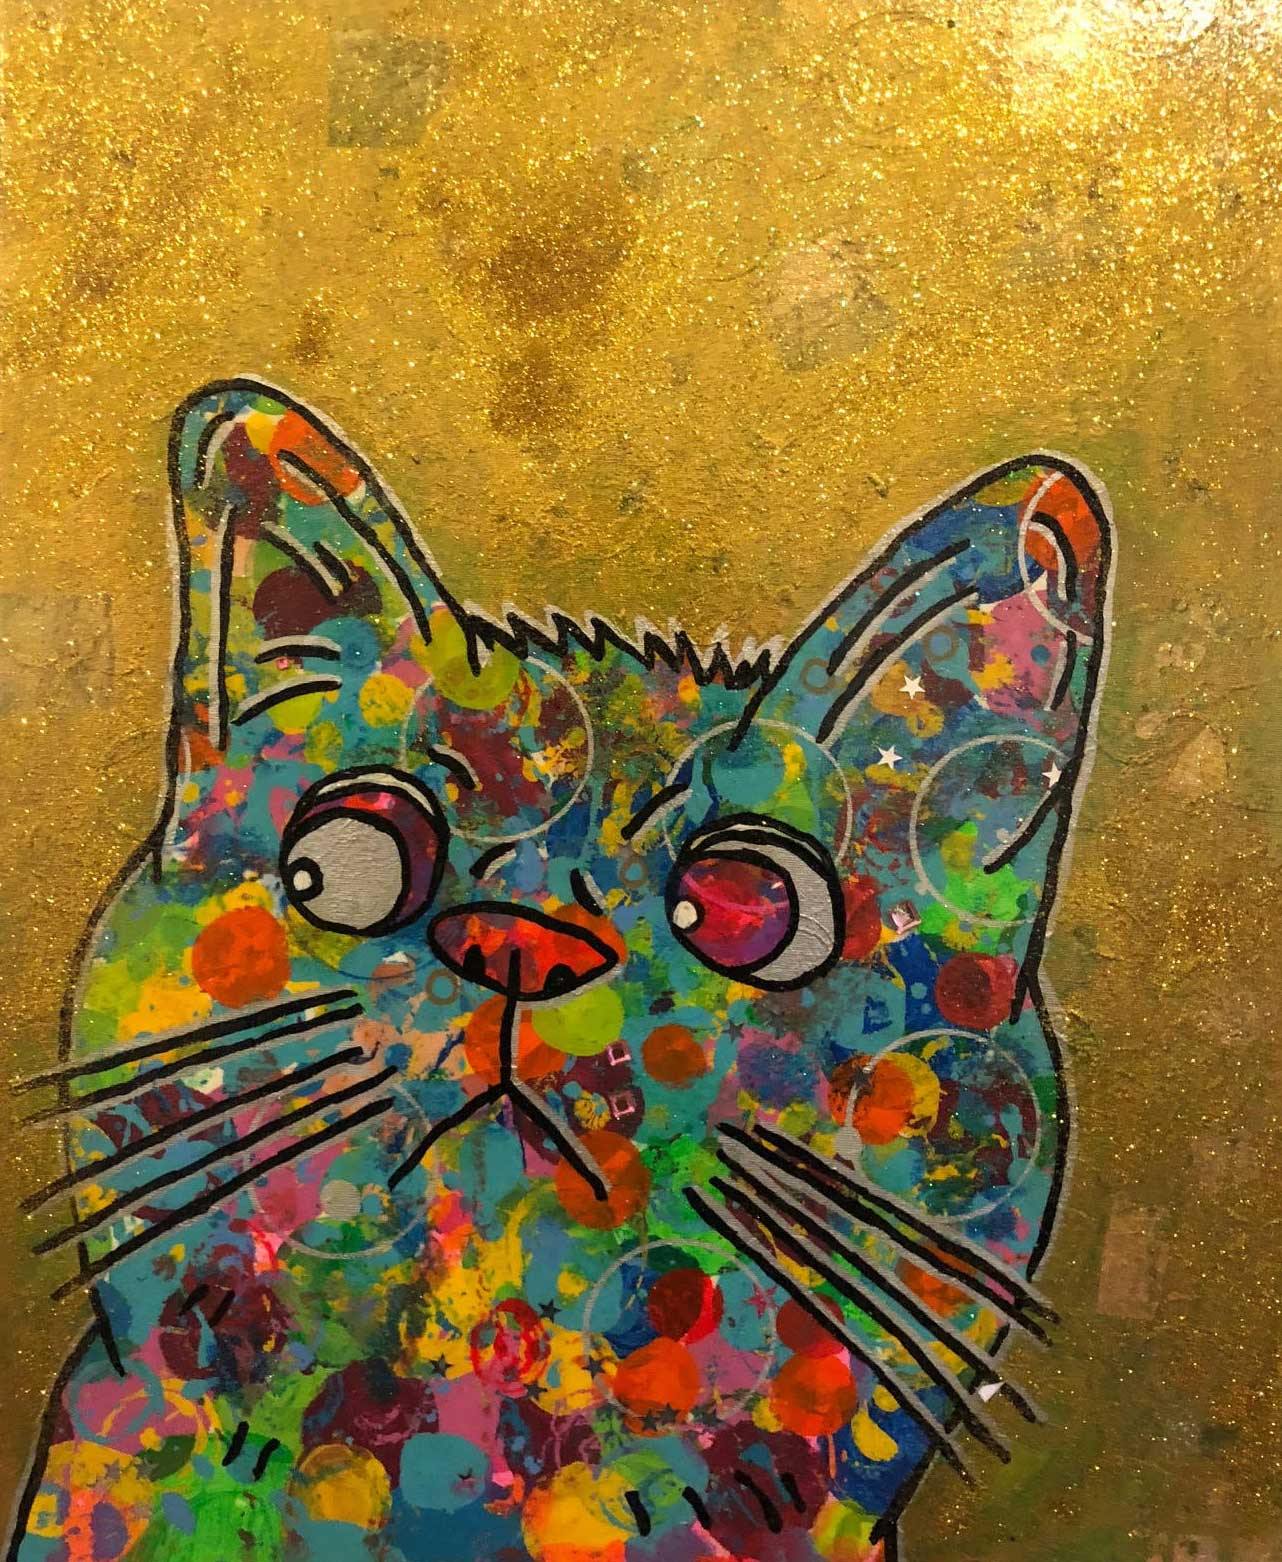 Cosmic moggy by Barrie J Davies 2018, mixed media on canvas, unframed, 50cm x 60cm. Barrie J Davies is an Artist - Pop Art and Street art inspired Artist based in Brighton England UK - Pop Art Paintings, Street Art Prints & Editions available.